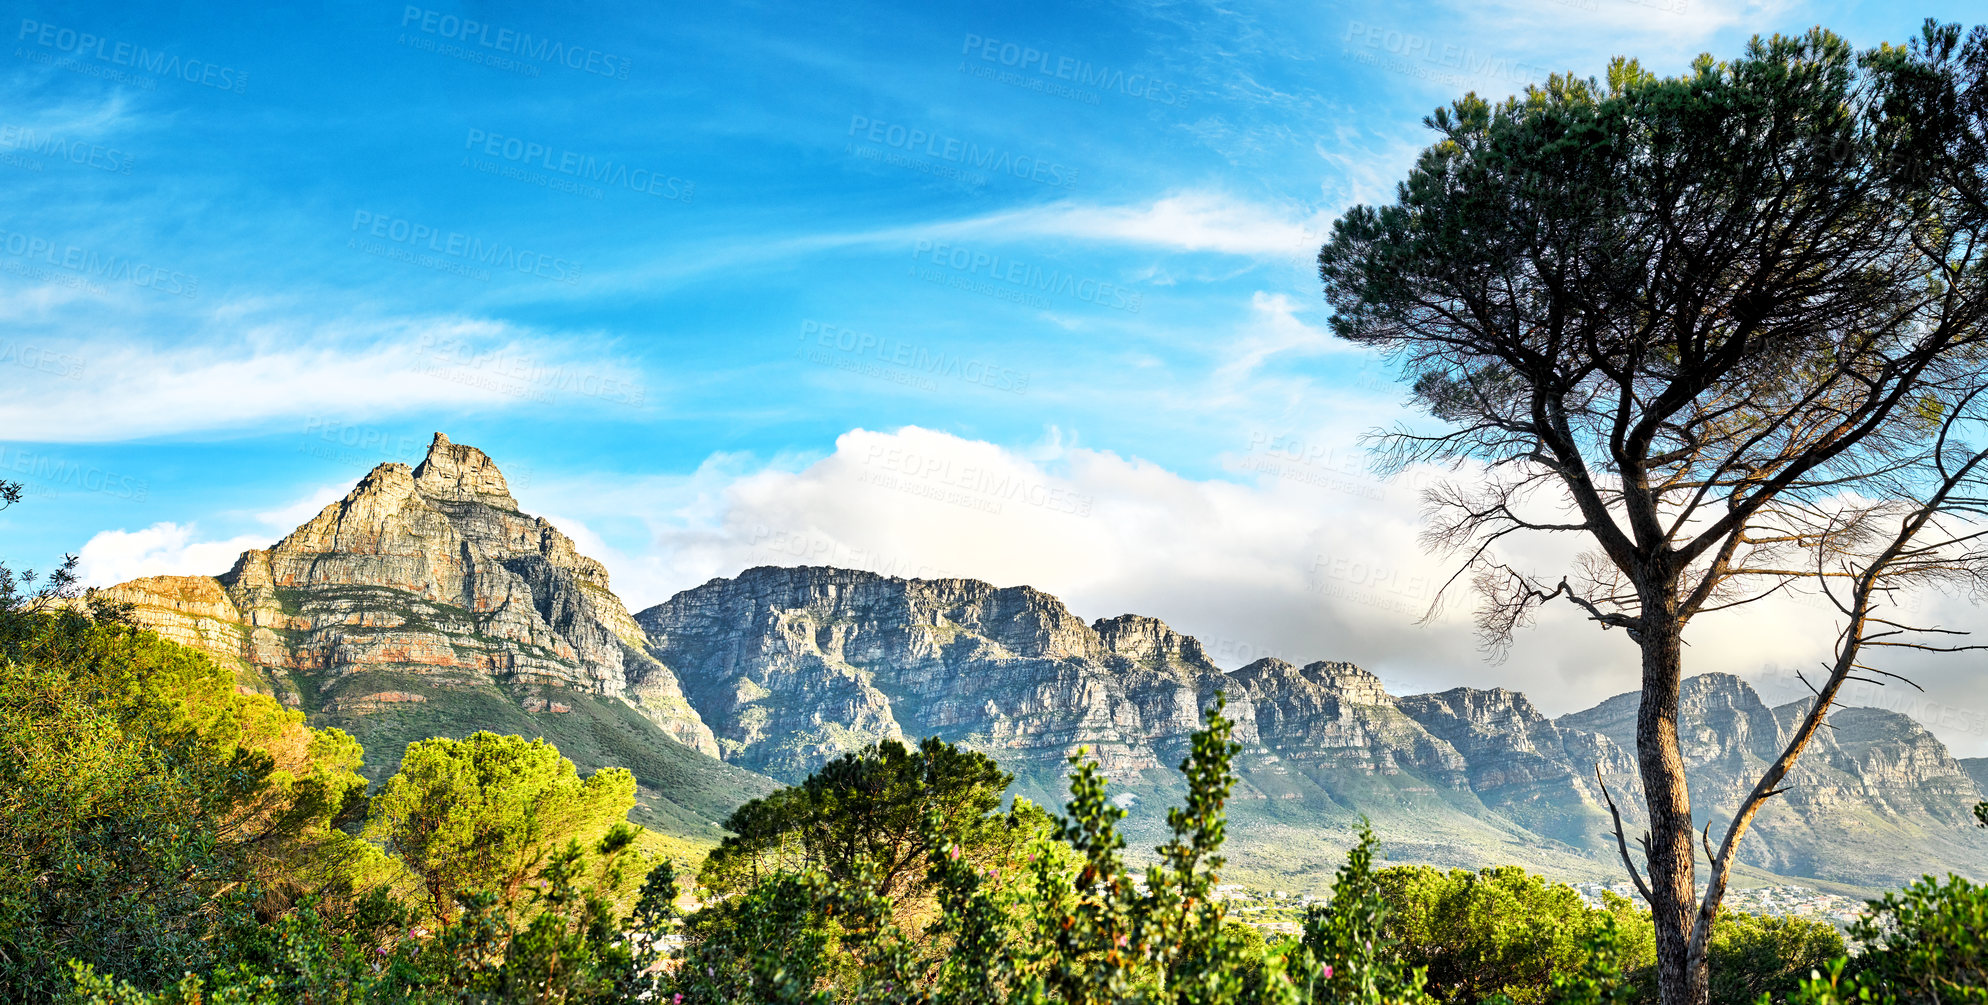 Buy stock photo Copy space with landscape of Table Mountain in Cape Town against a cloudy blue sky background. Beautiful scenic view of plants and trees around an iconic and famous landmark on a sunny day outdoors